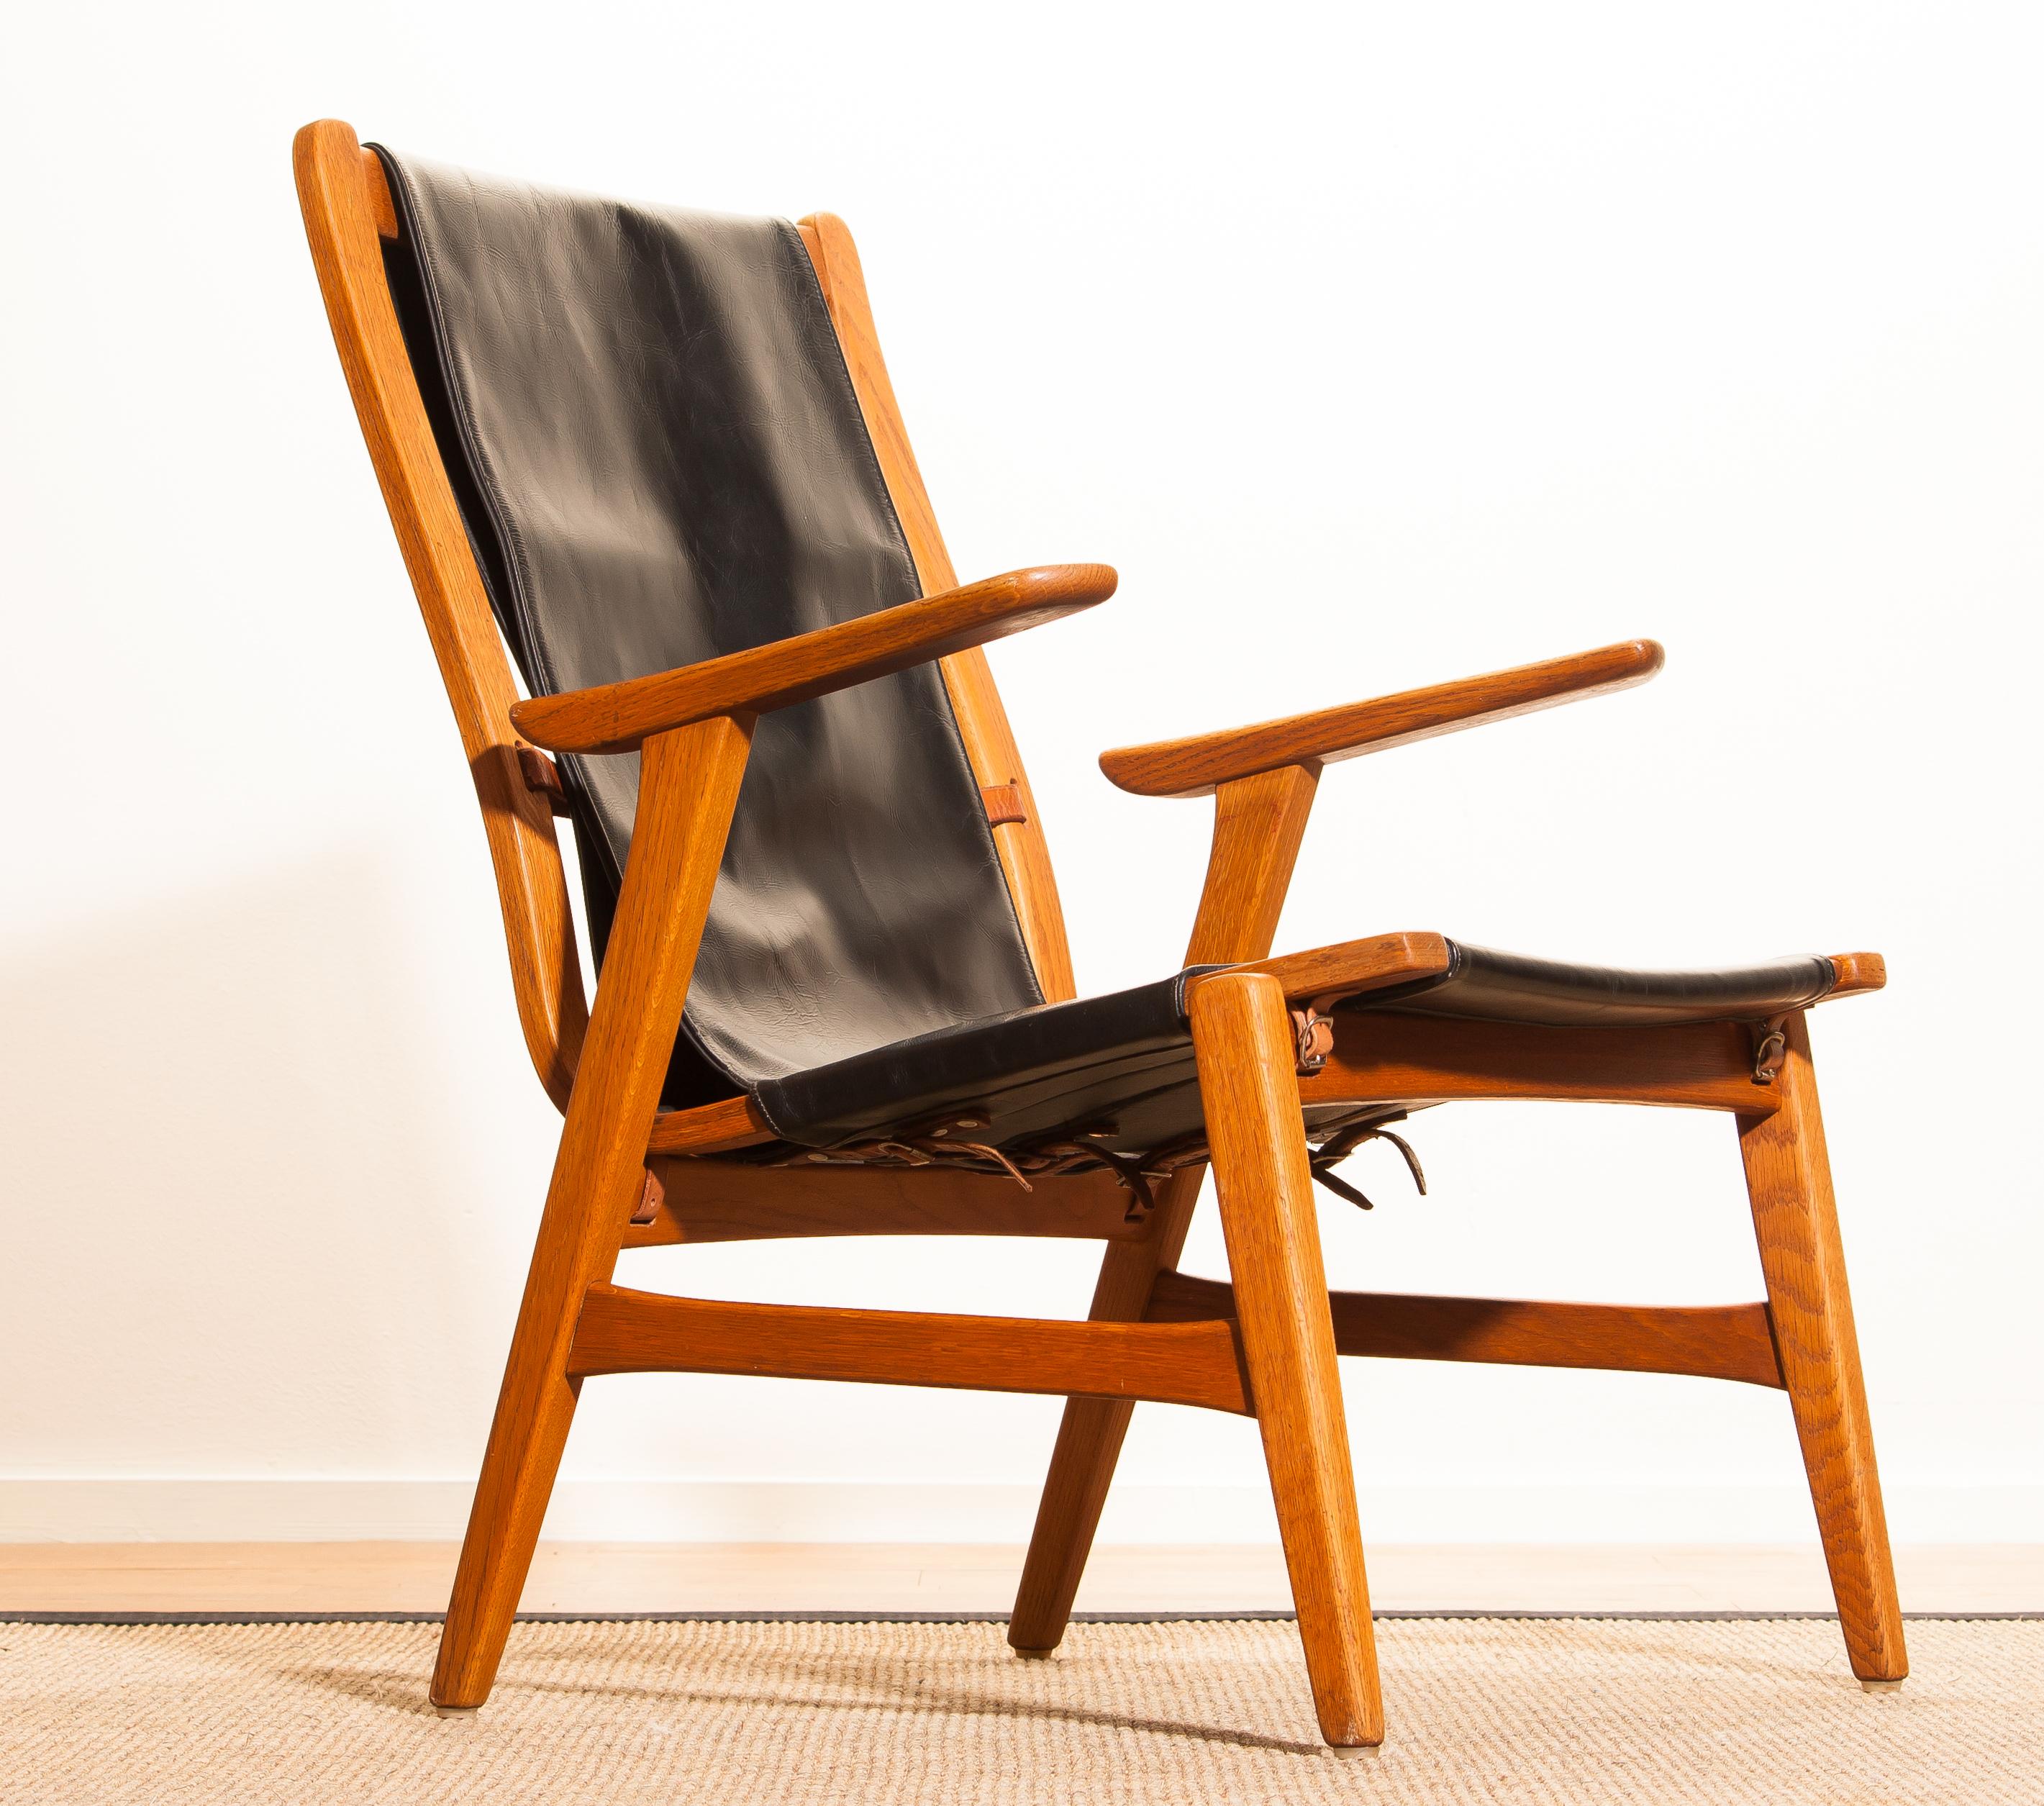 Swedish 1950s, Oak and Leatherette Hunting Lounge Chair 'Ulrika' by Östen Kristiansson